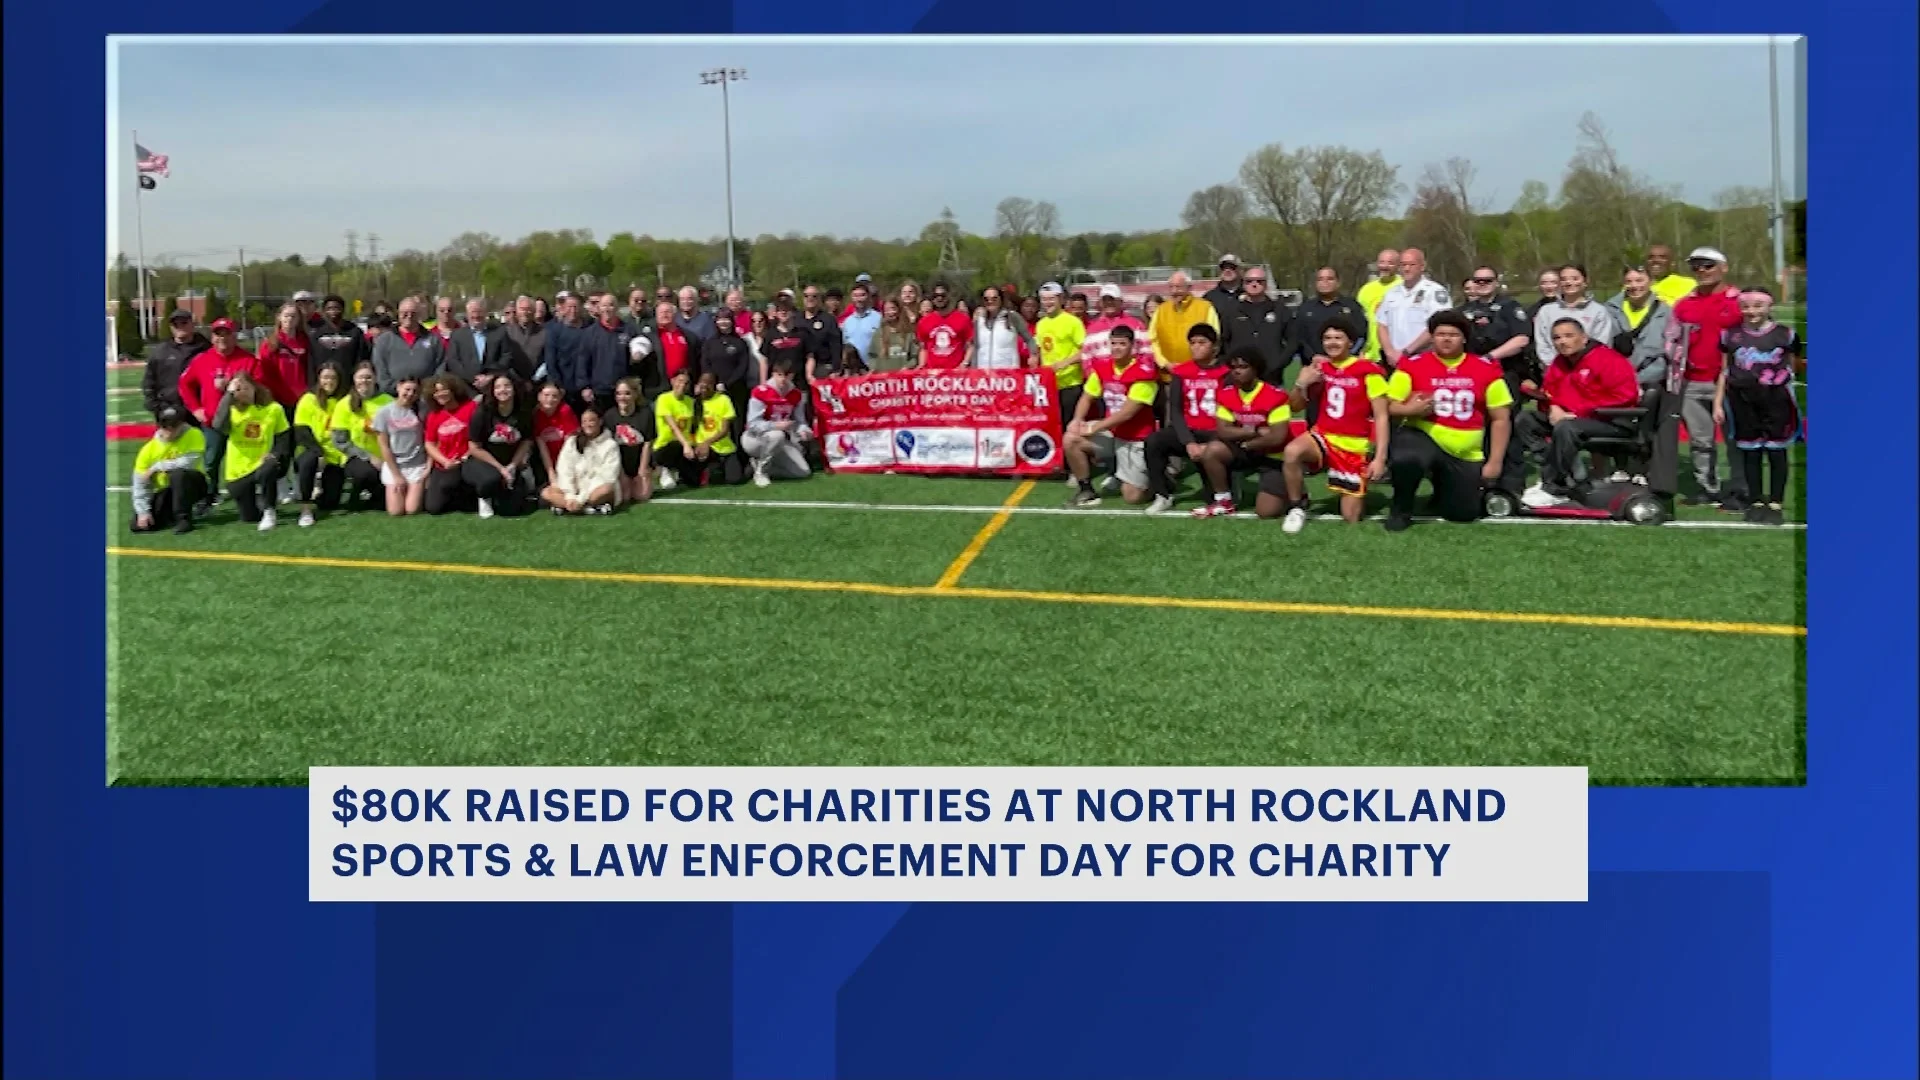 9th annual North Rockland Sports and Law Enforcement Day raises over $80,000 for charity